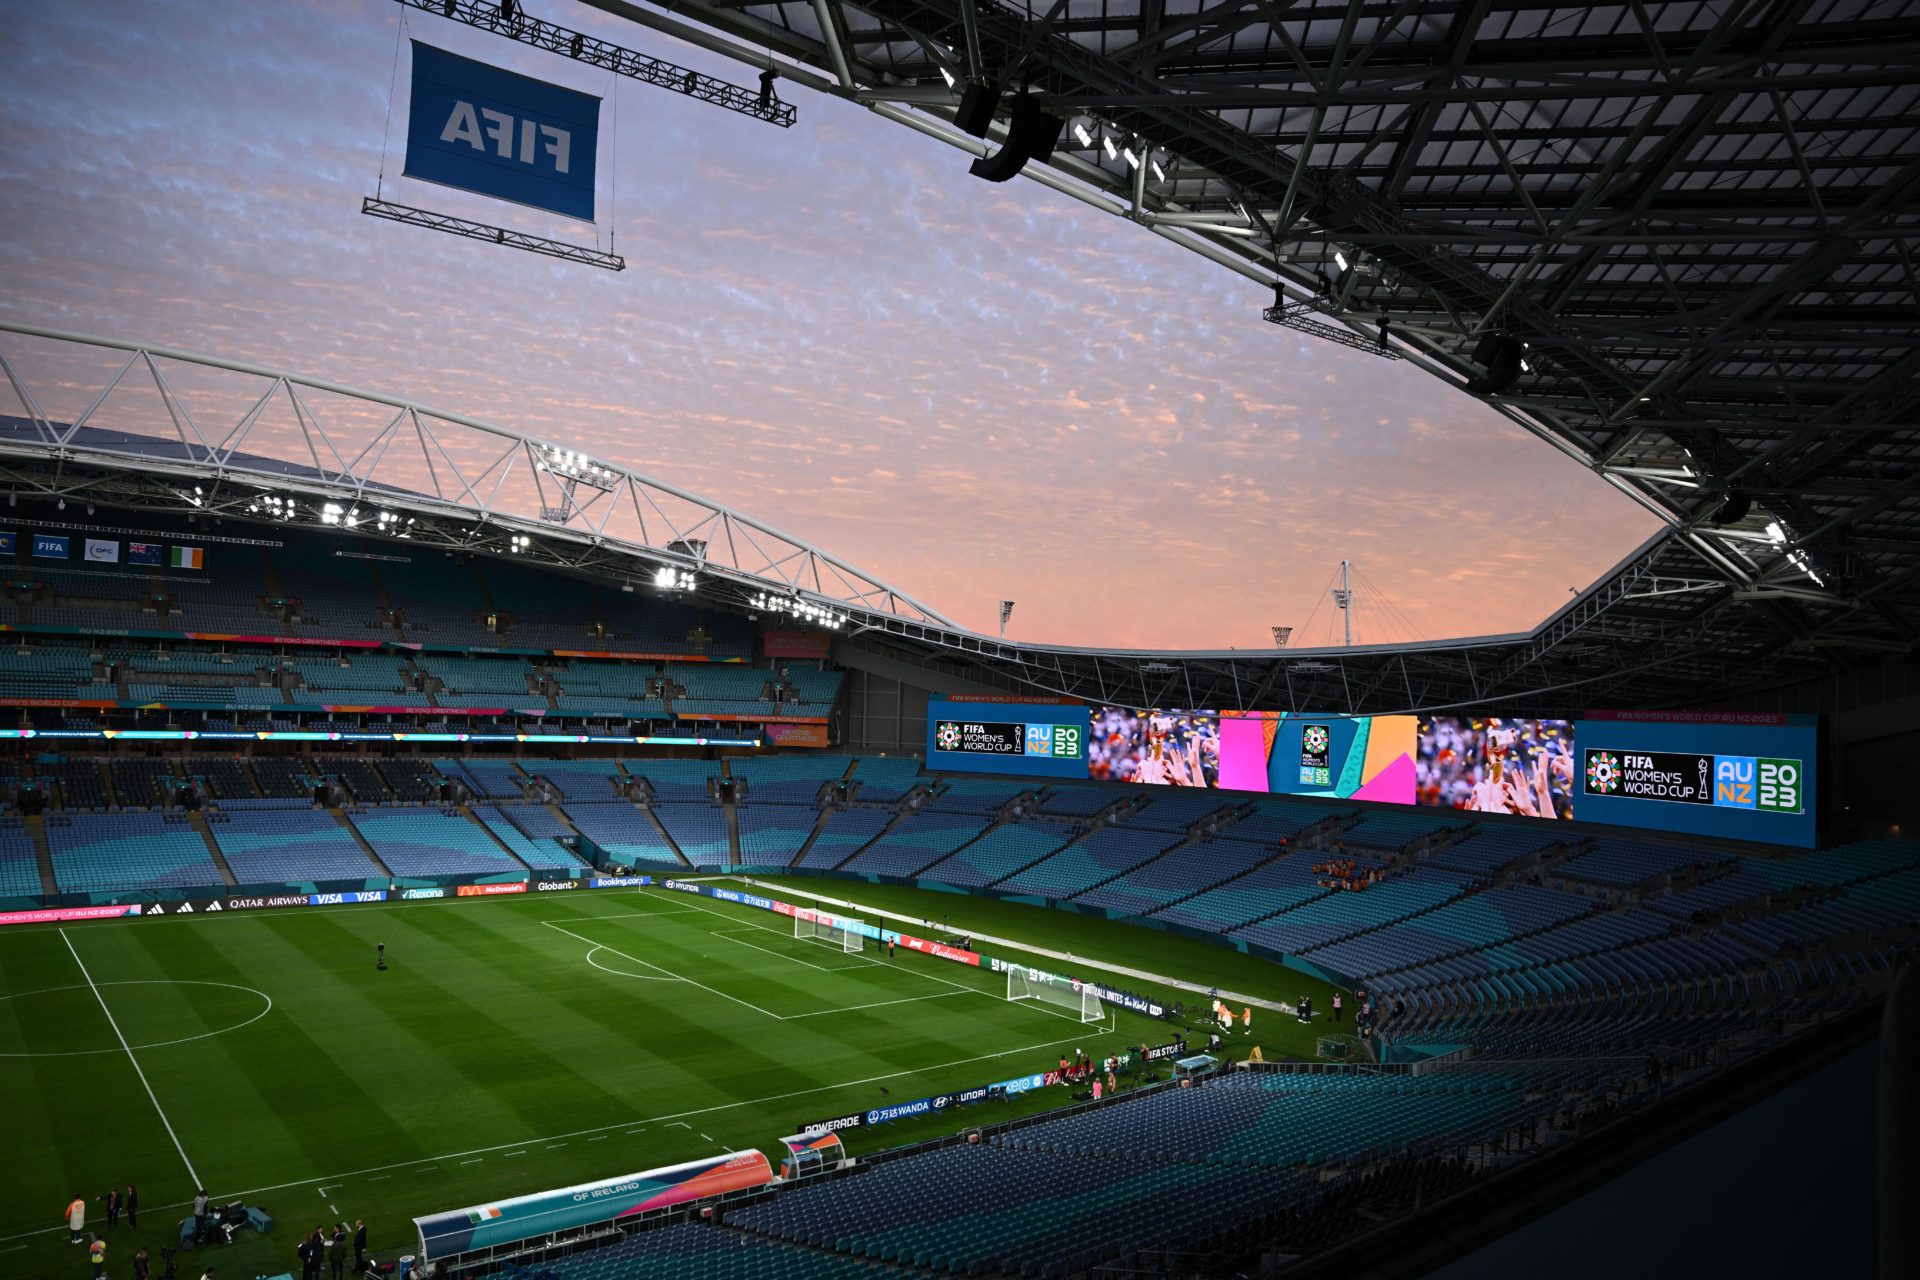 A general view of Stadium Australia ahead of the FIFA Women's World Cup 2023 soccer match between Australia and Ireland